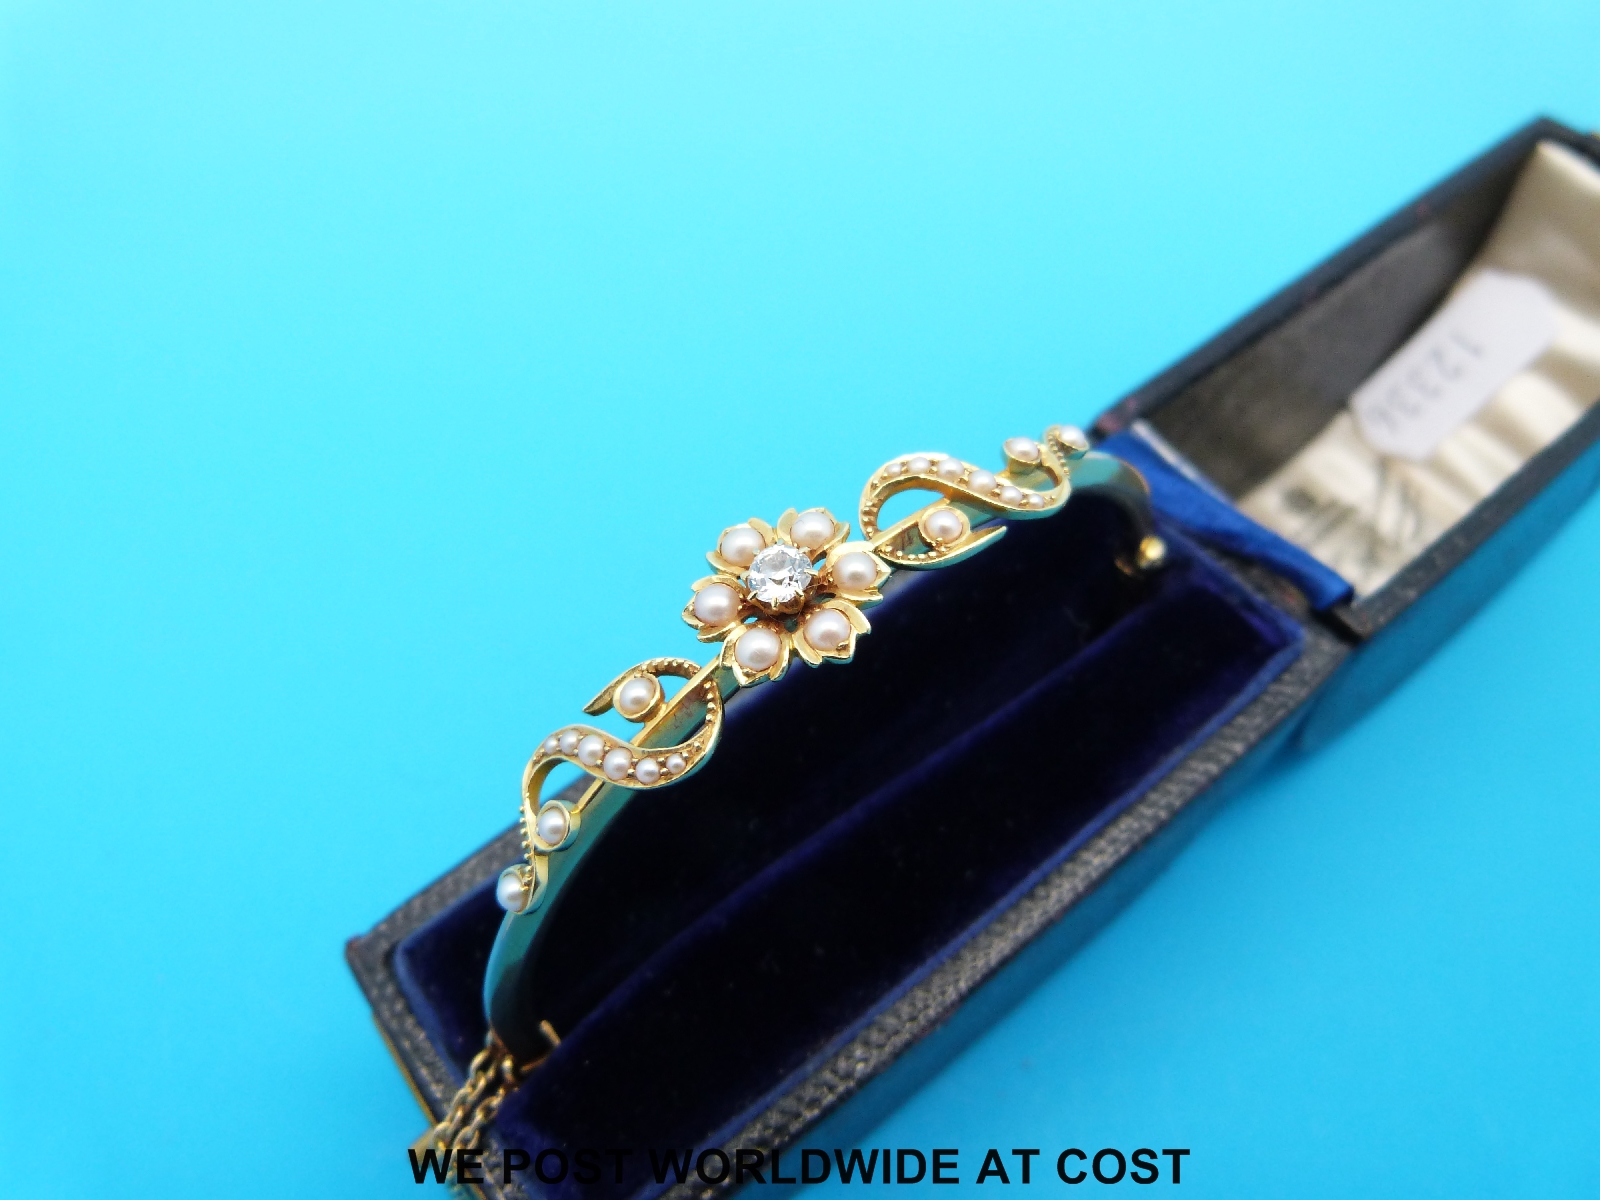 An Edwardian gold bangle set with a diamond and seed pearls in a floral design, - Image 2 of 3